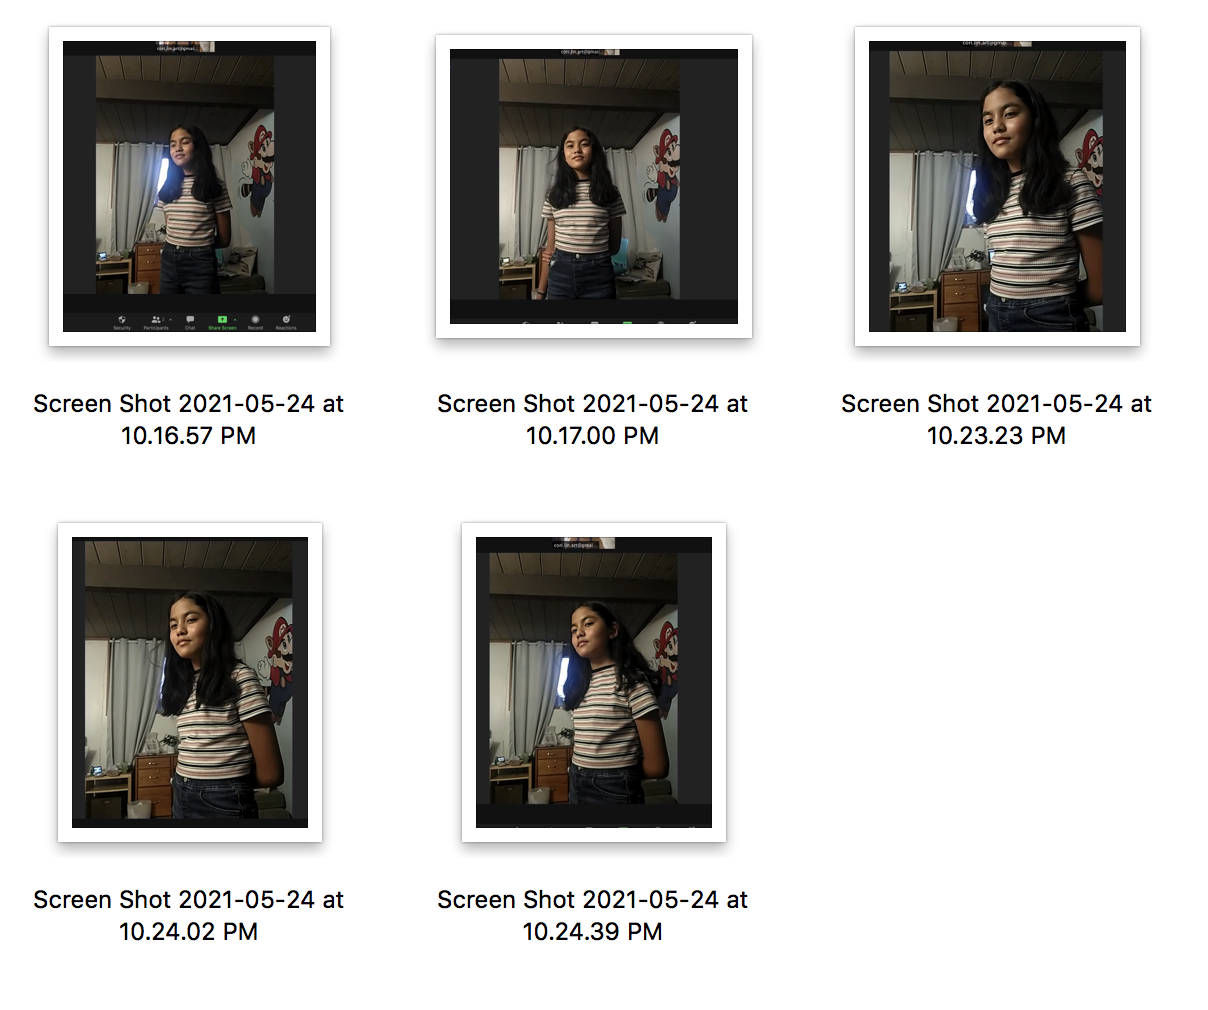 screenshot of thumbnail images of my cousin lia, age 11 posing for the amabie. Images are timestamped from May 2021